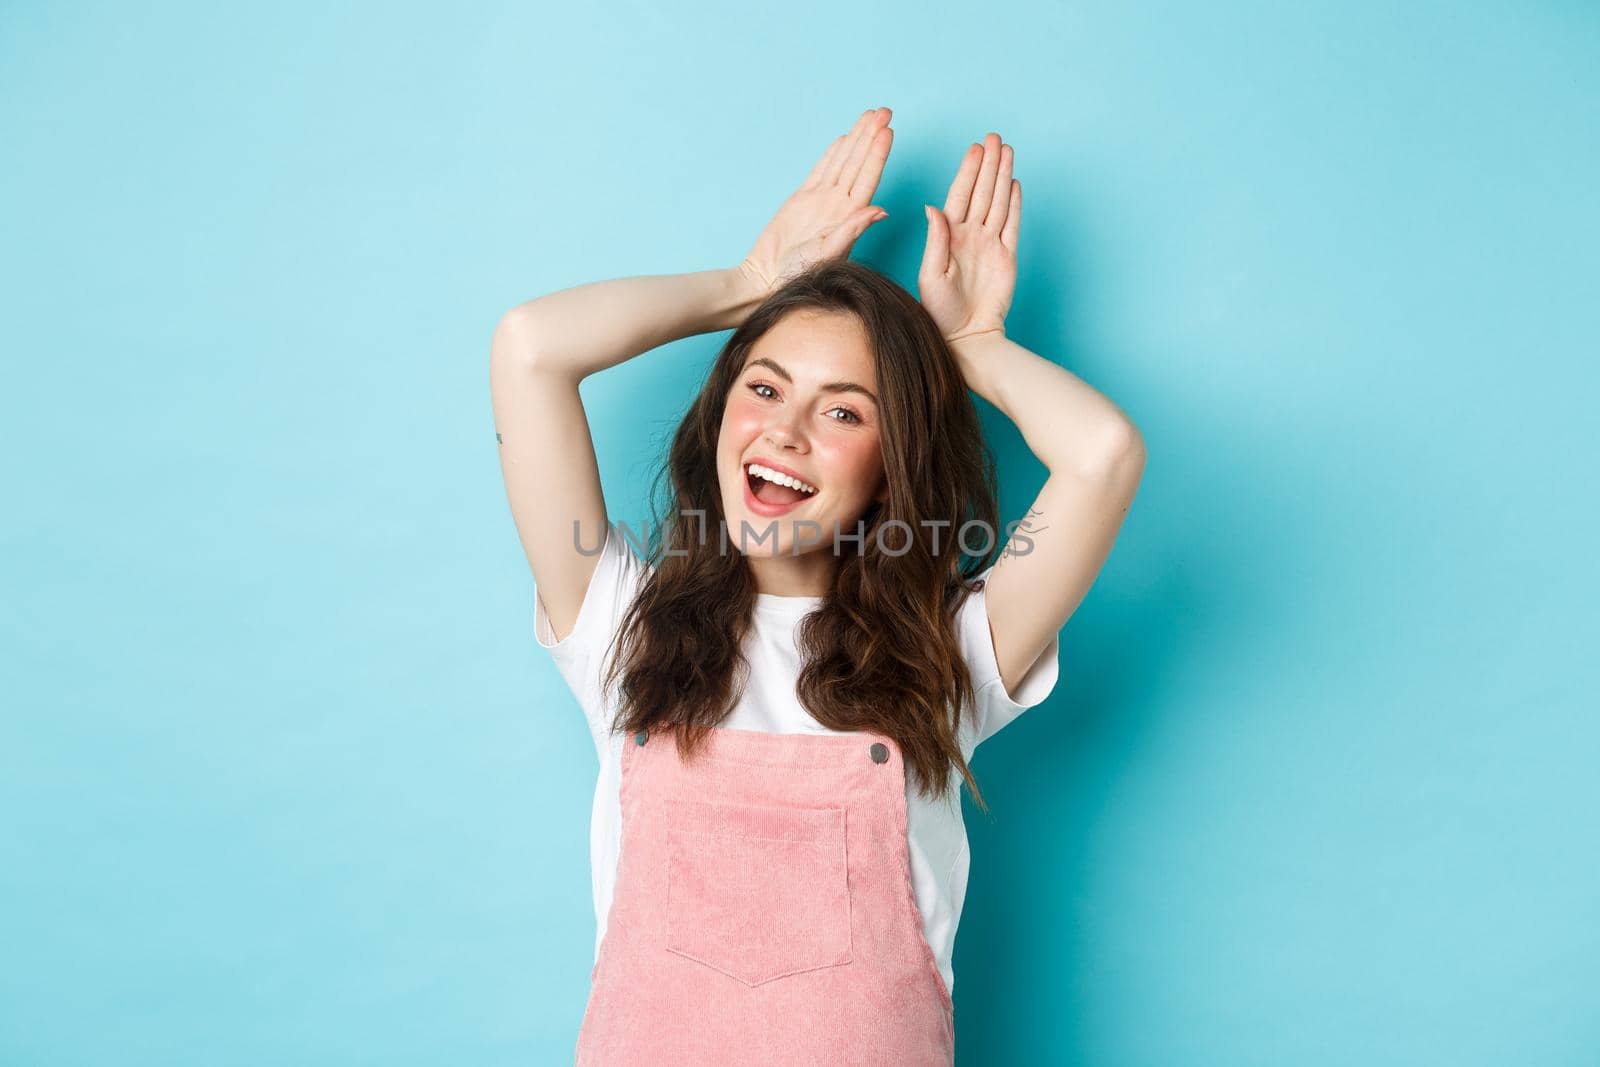 Beautiful girl mimic Easter bunny, showing rabbit ears with hands on head and smiling lovely, dancing happy, standing over blue background.